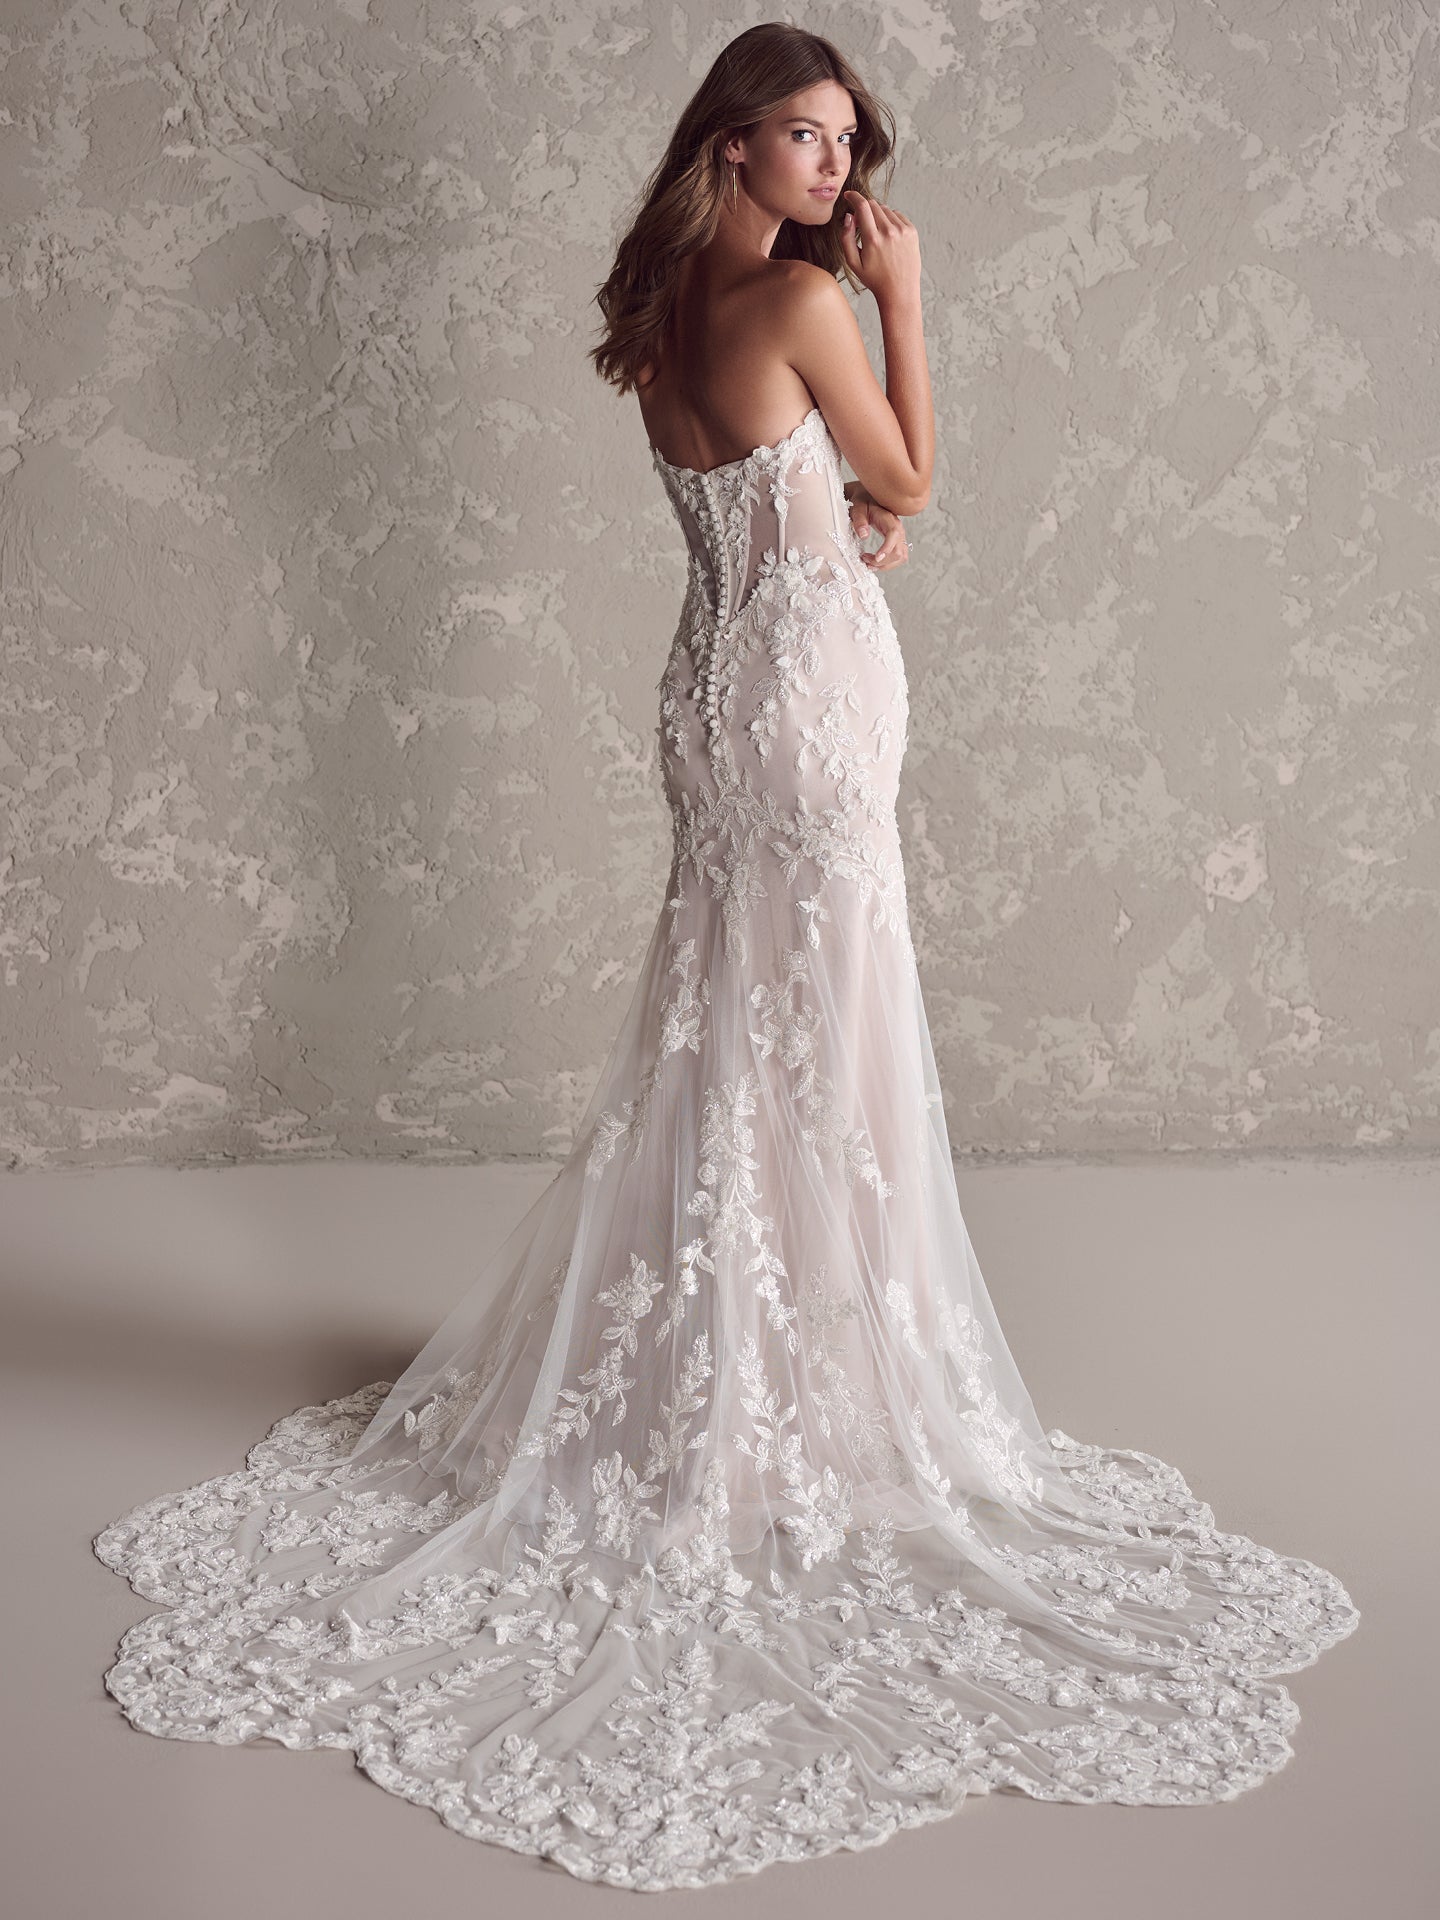 Romantic Floral Fit-and-Flare Gown by Maggie Sottero - Image 2